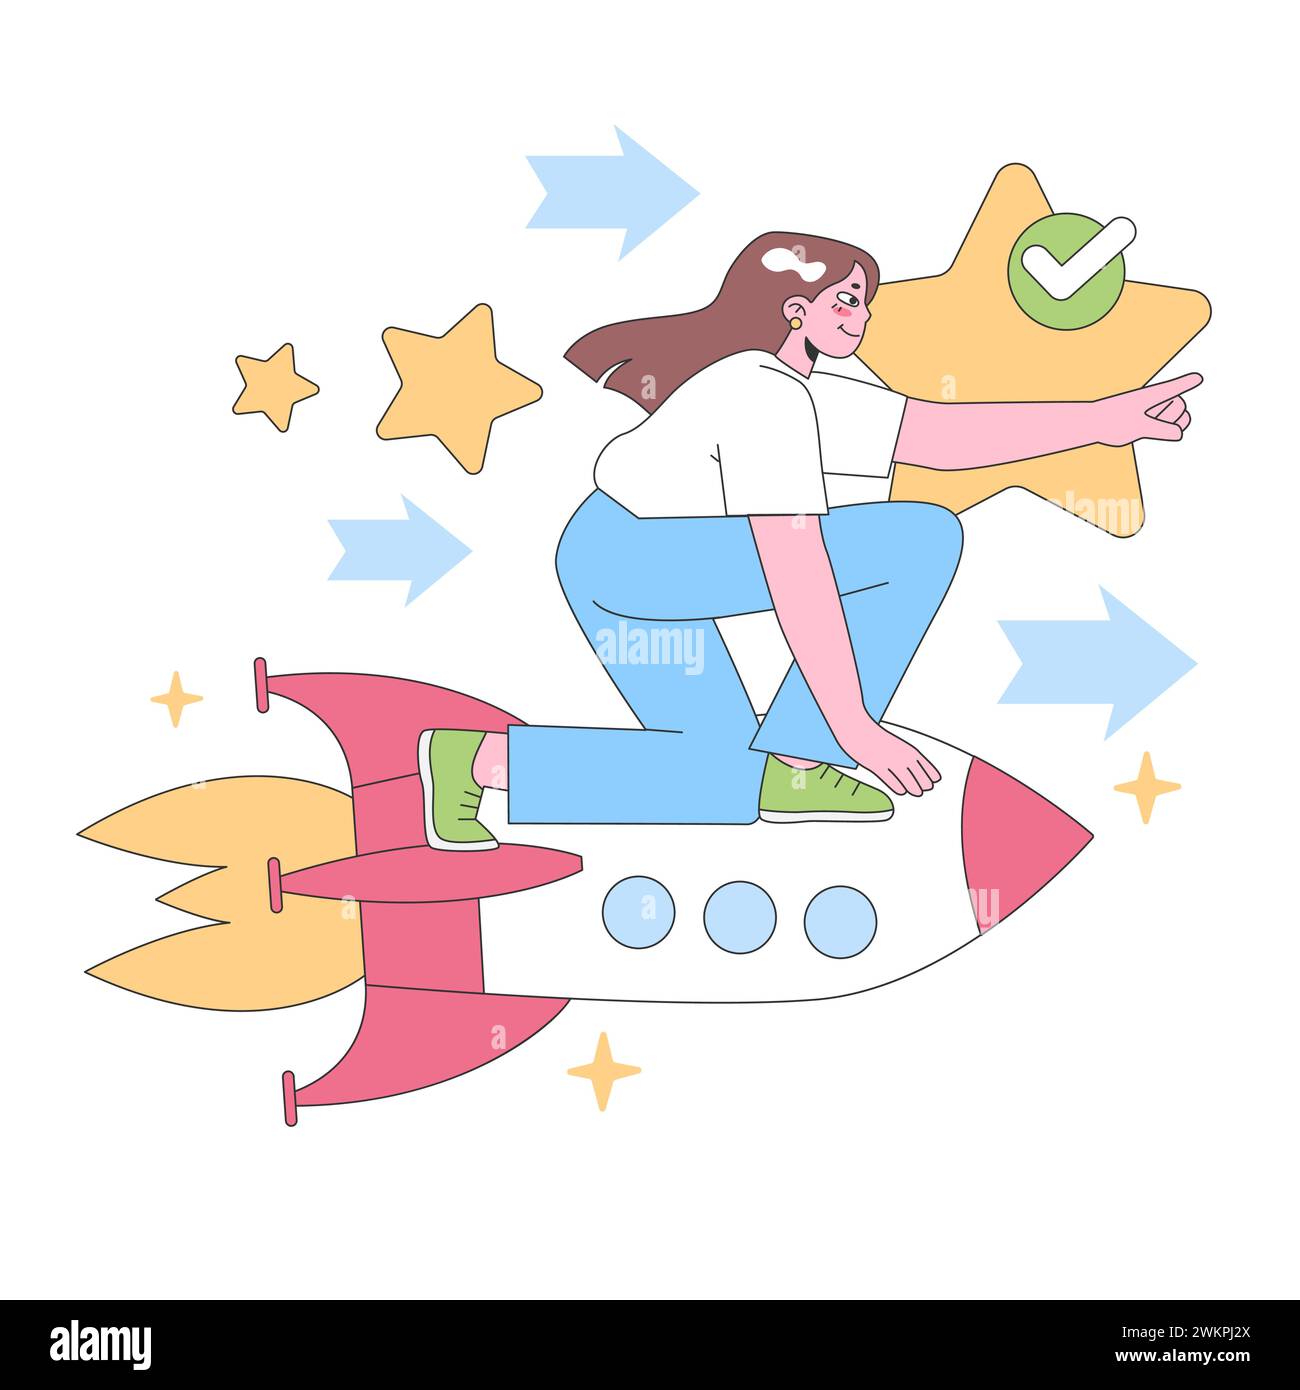 Ambition concept. Energetic woman riding a rocket towards the stars, showcasing determination and goal achievement. Pursuing dreams, rapid growth. Flat vector illustration. Stock Vector